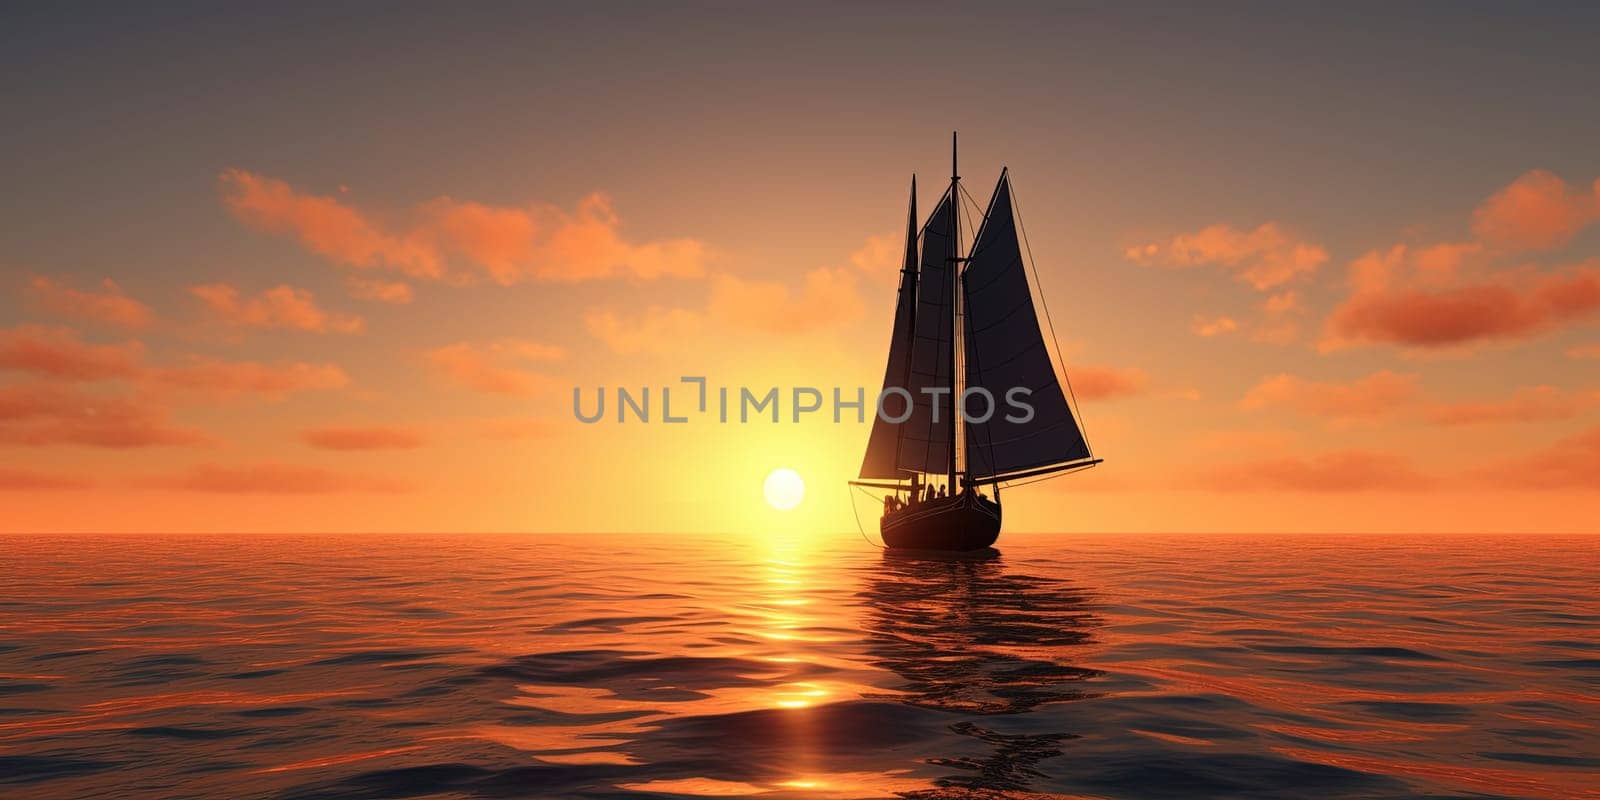 Lonely Sailboat On The High Seas, At Sunset by GekaSkr